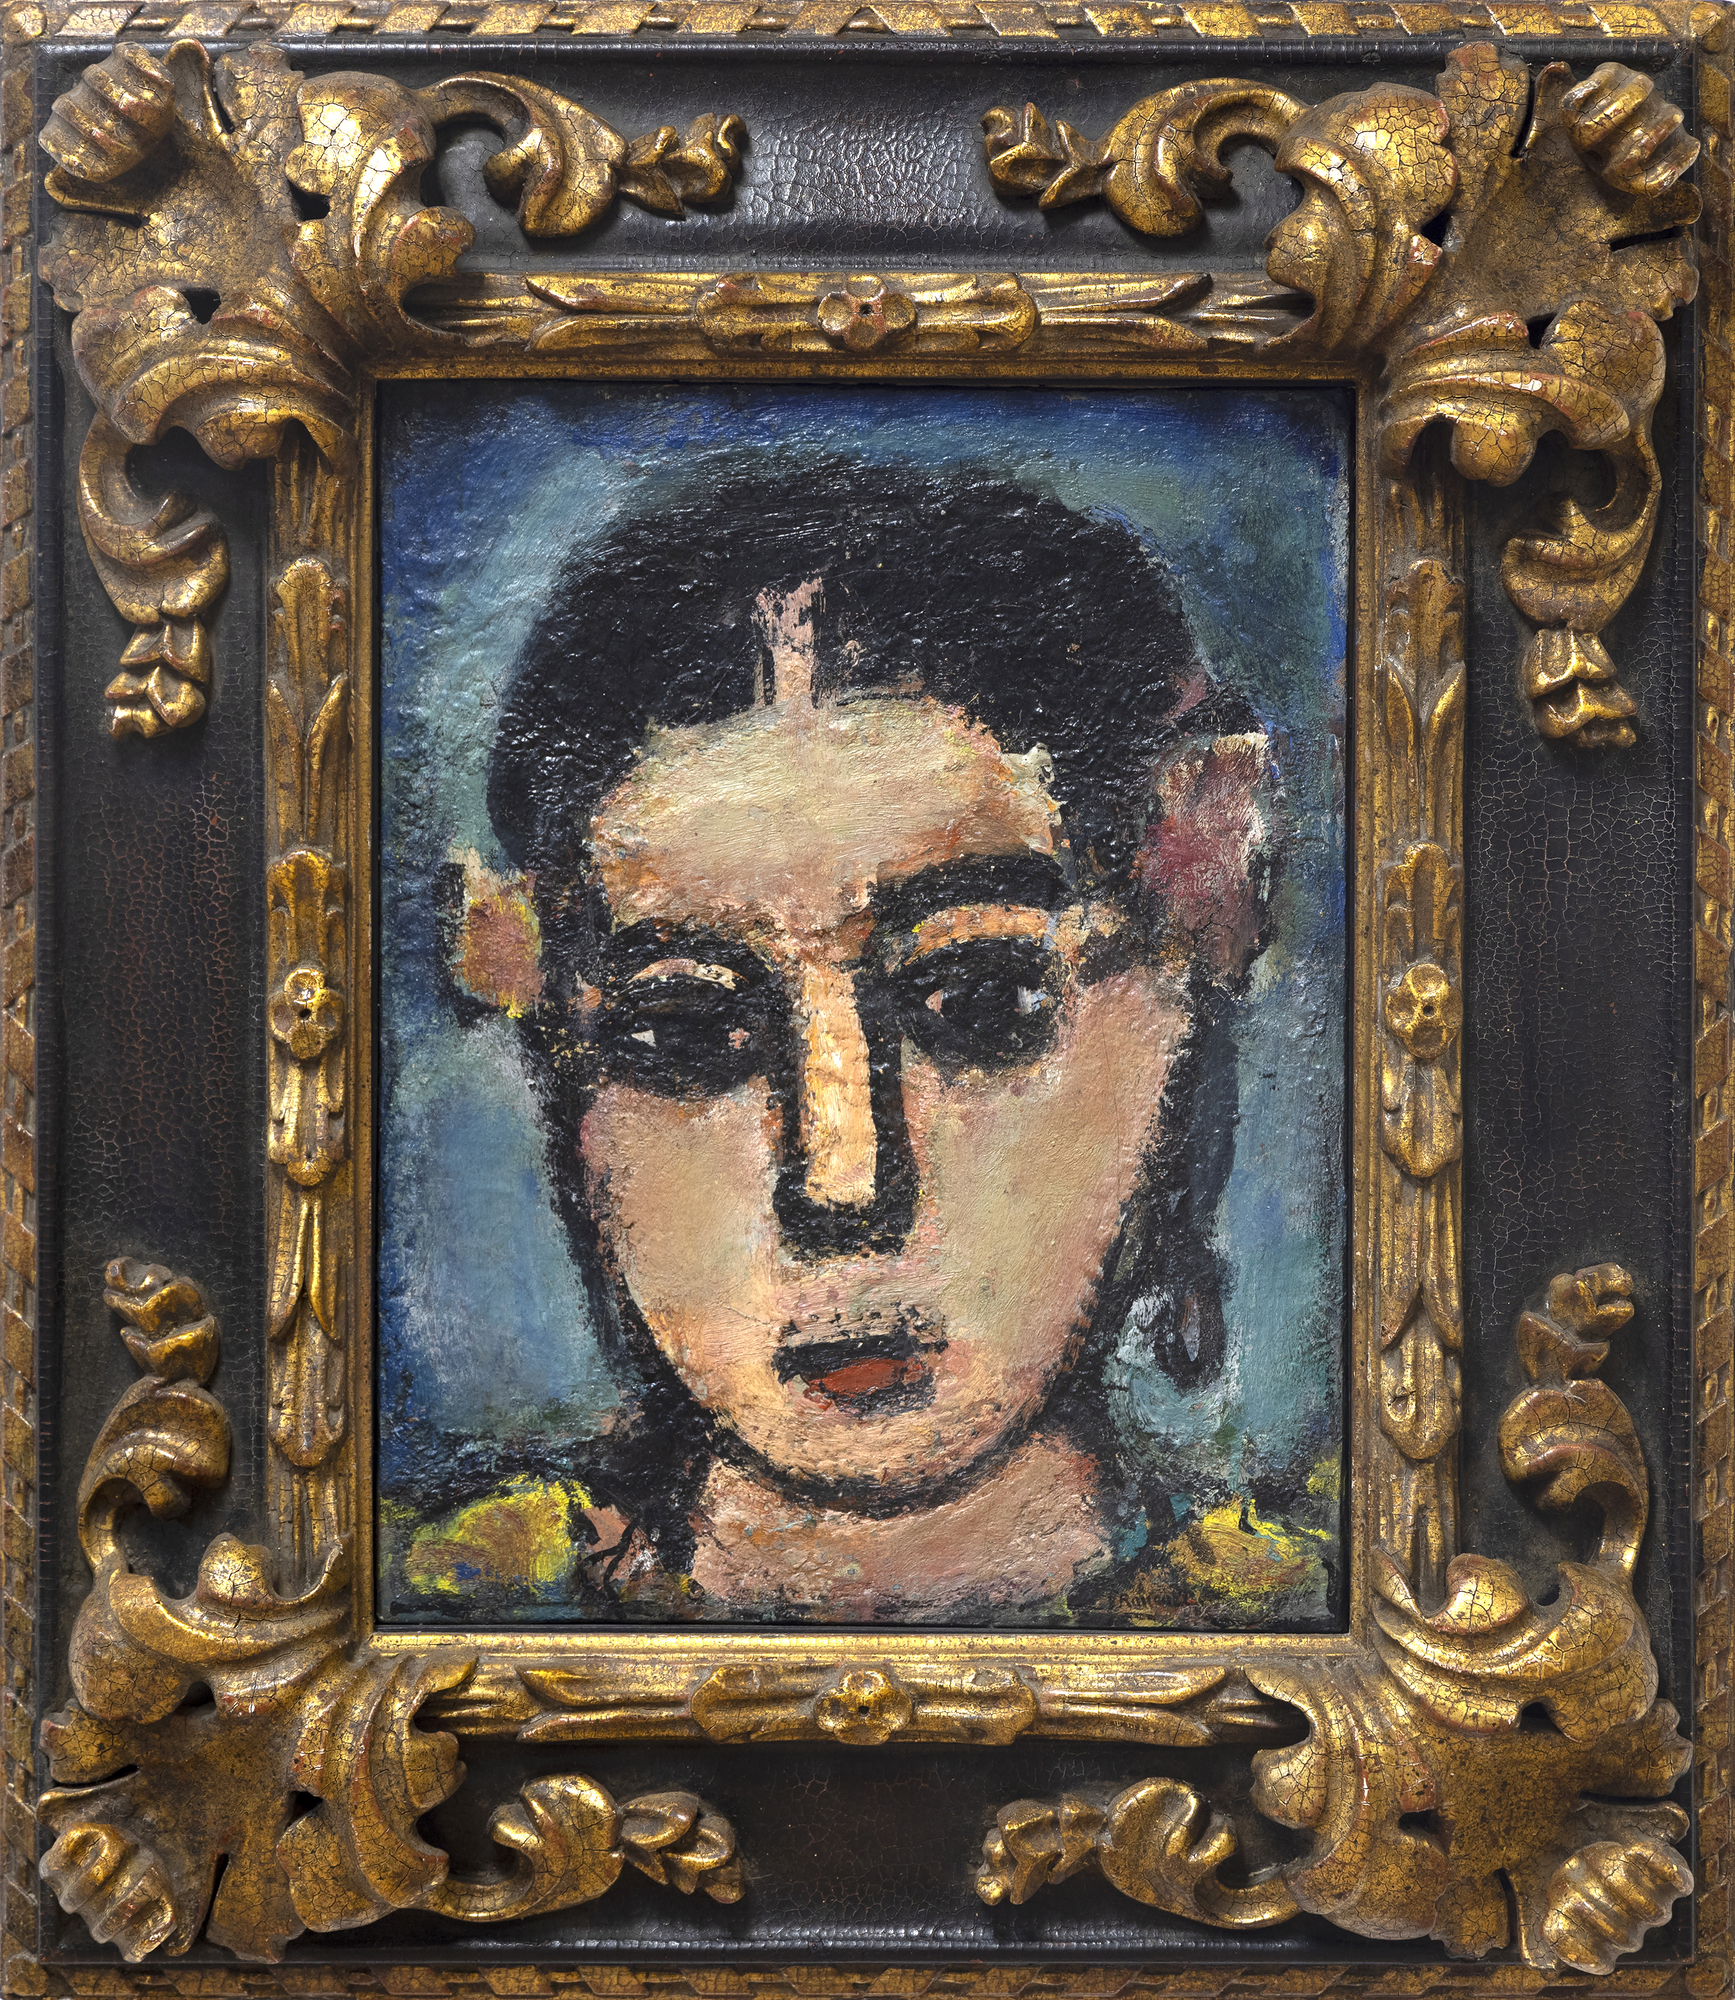 GEORGES ROUAULT - Carlotta - oil on canvas - 15 7/8 x 12 1/4 in.